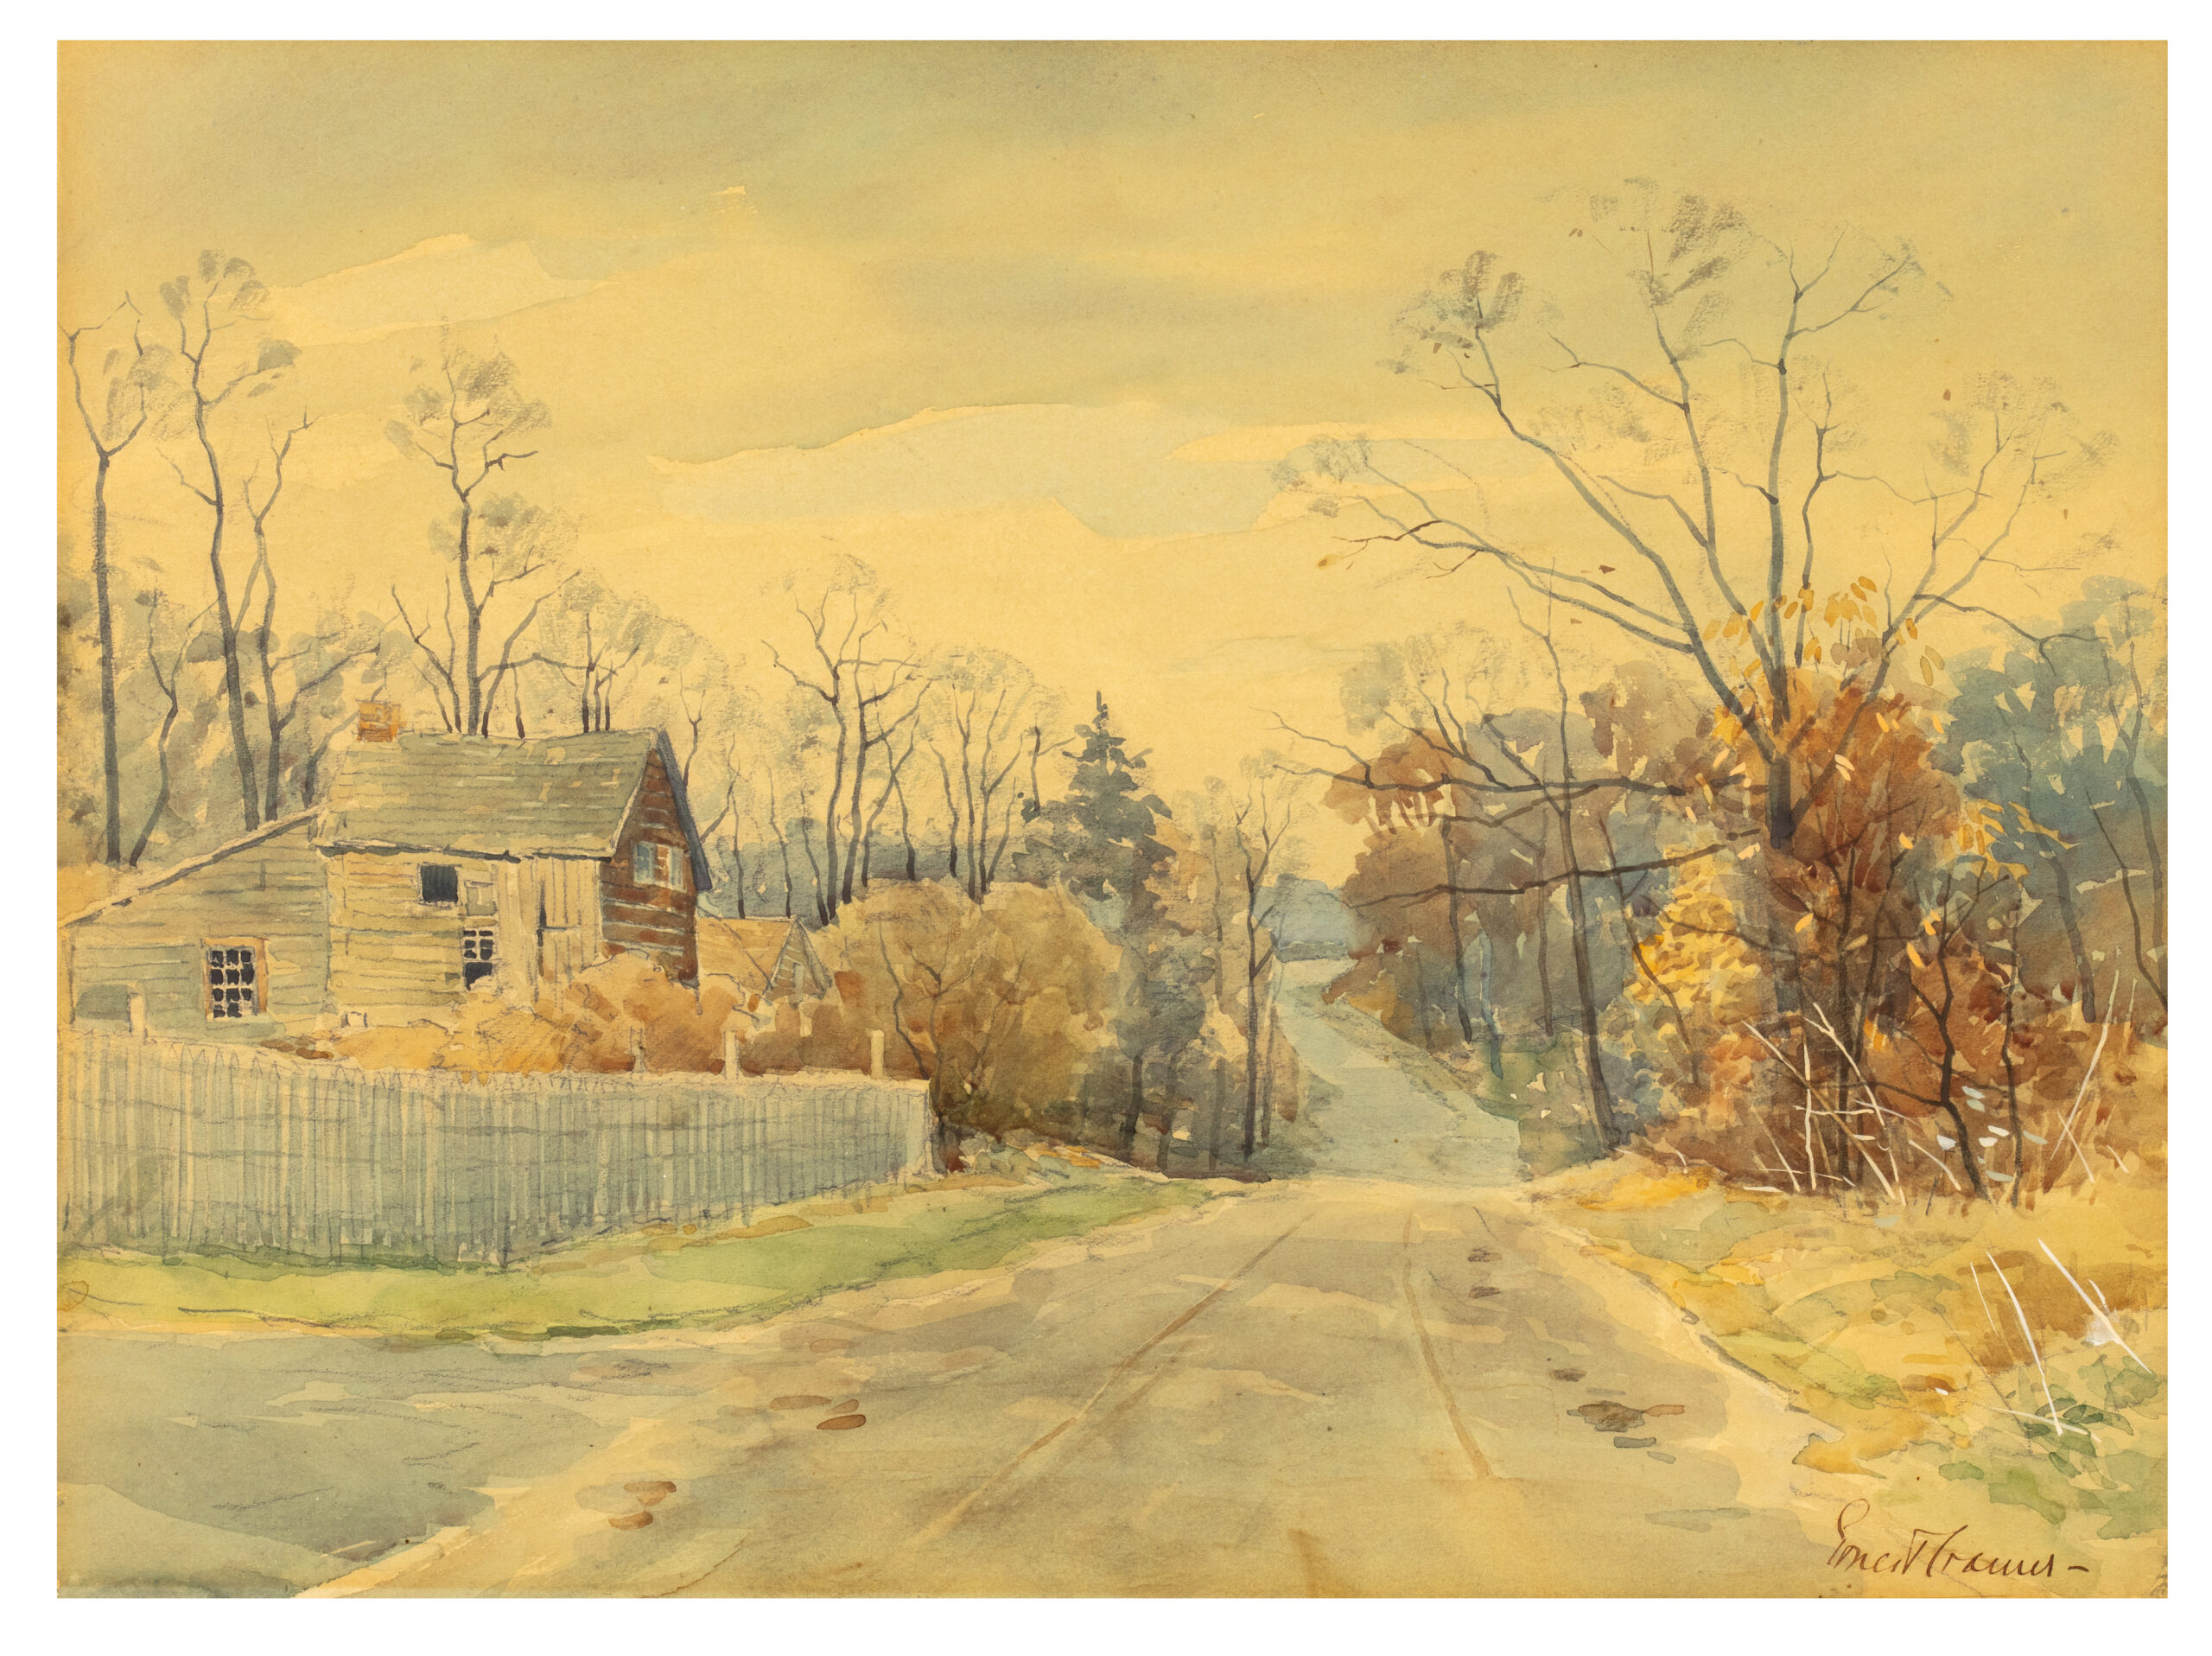 Watercolor on Paper Loan from Fine ARts Collection, U.S. General Services Administration New Deal Art Project